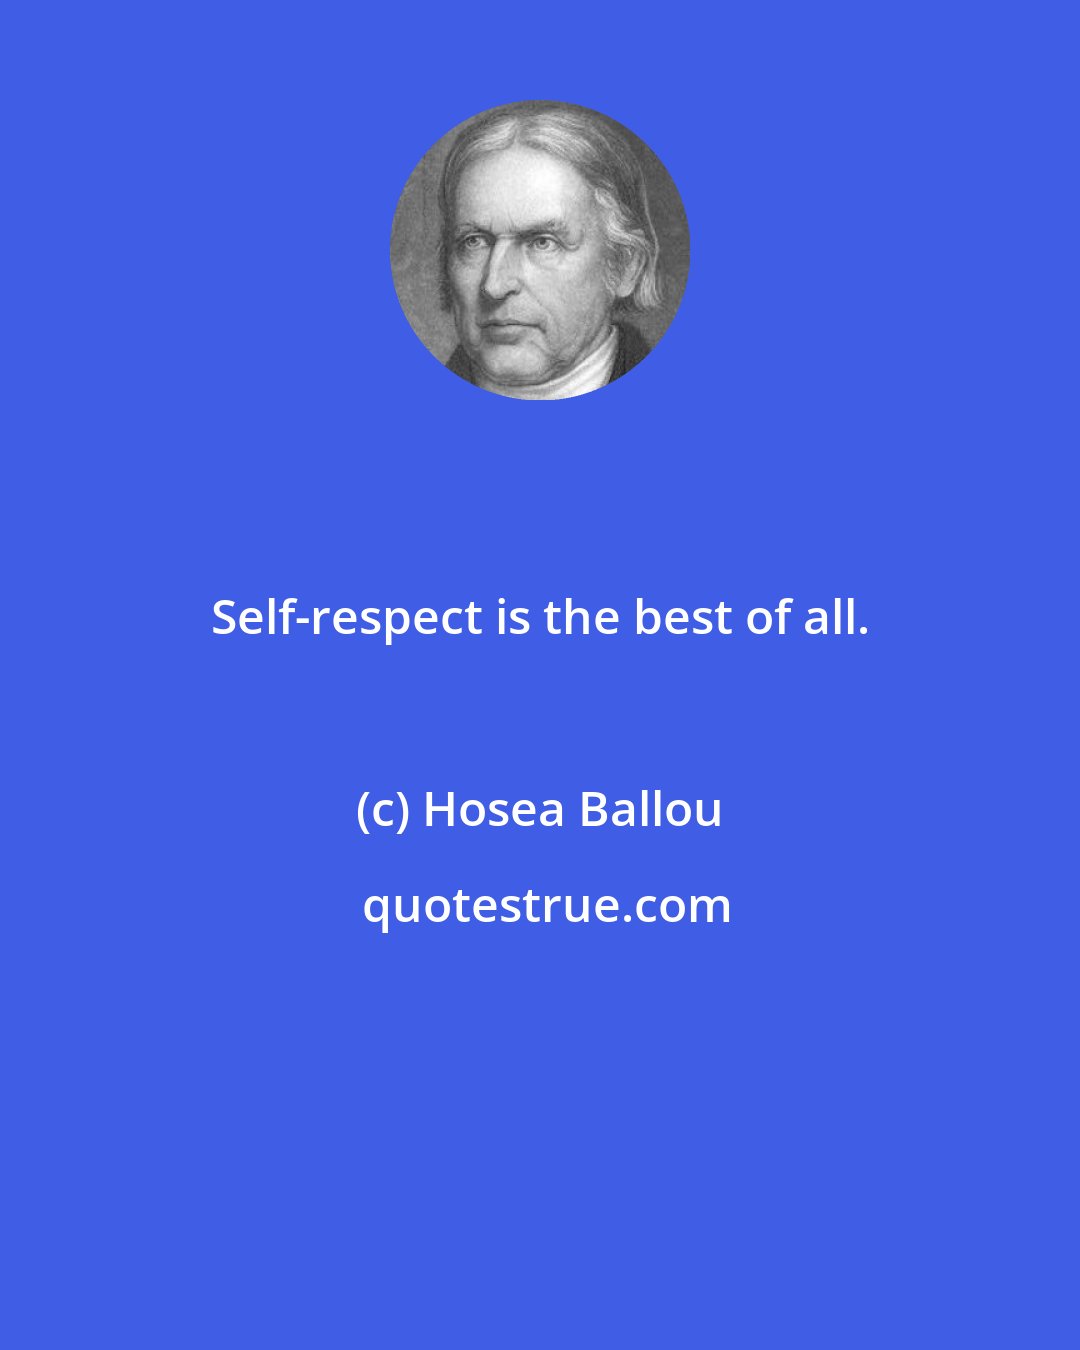 Hosea Ballou: Self-respect is the best of all.